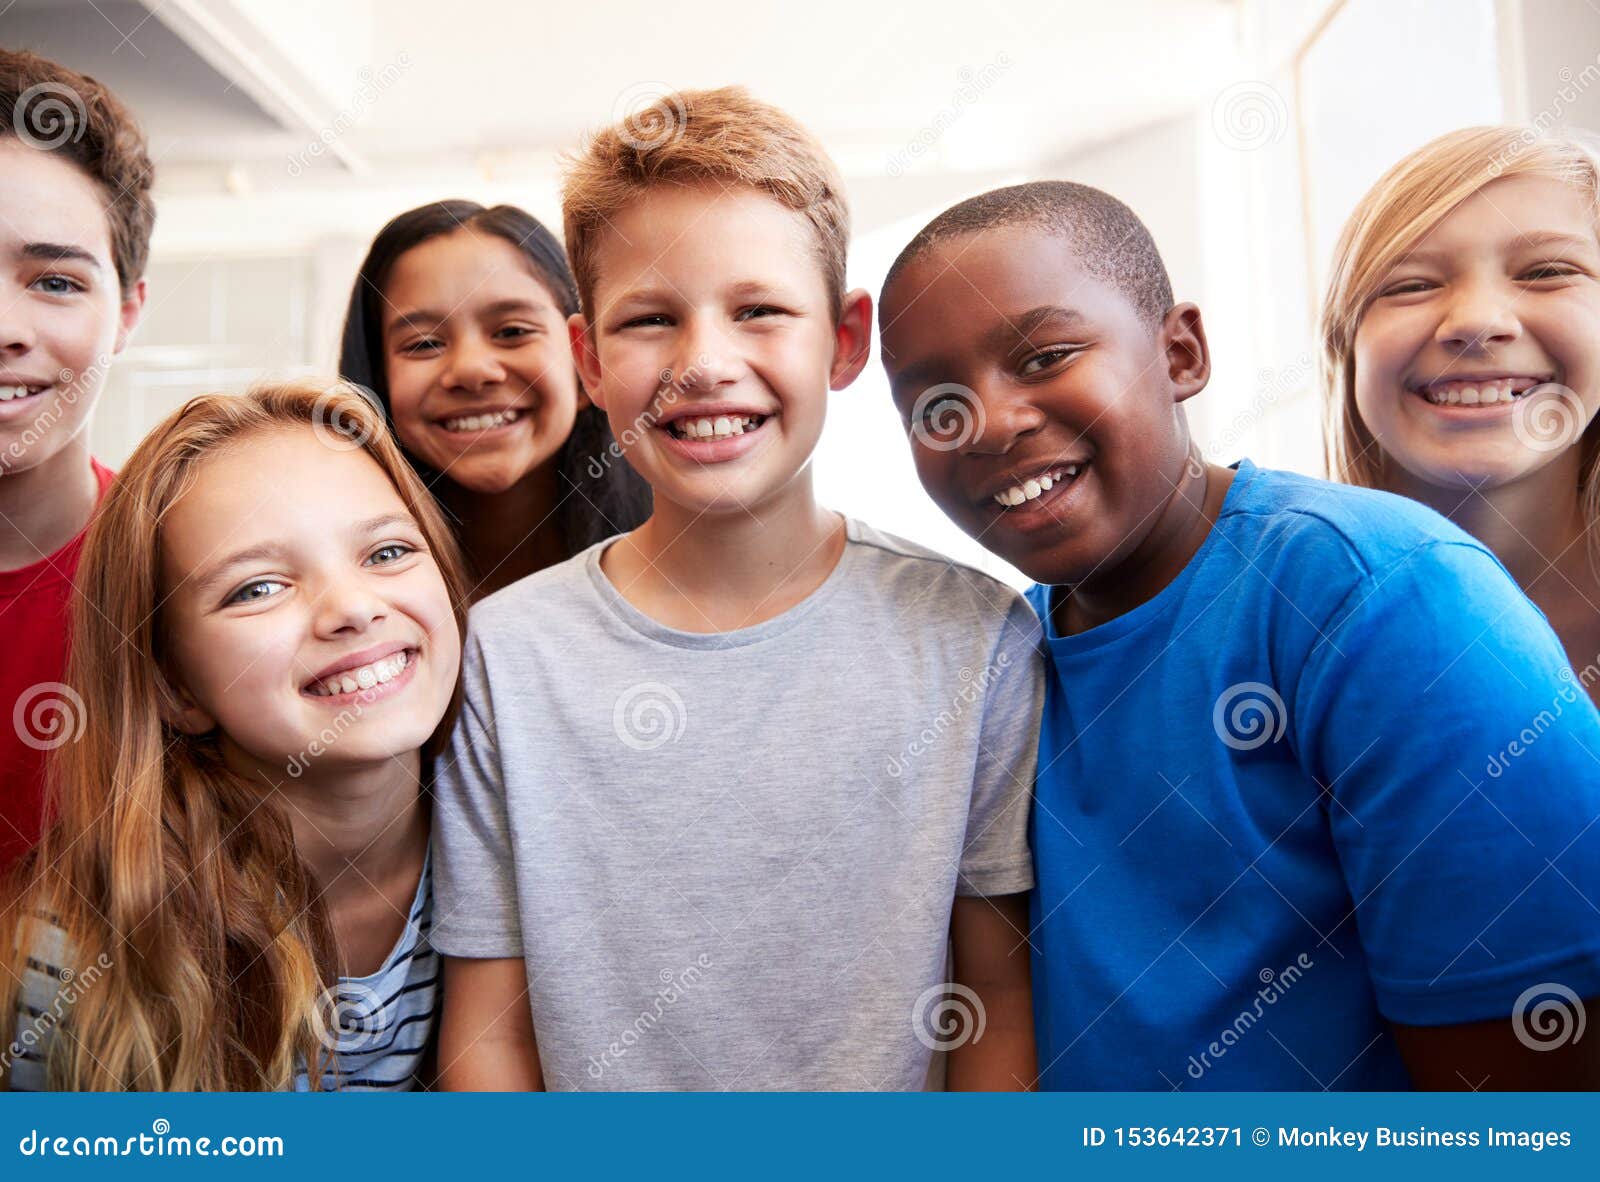 portrait of smiling male and female students in grade school classroom